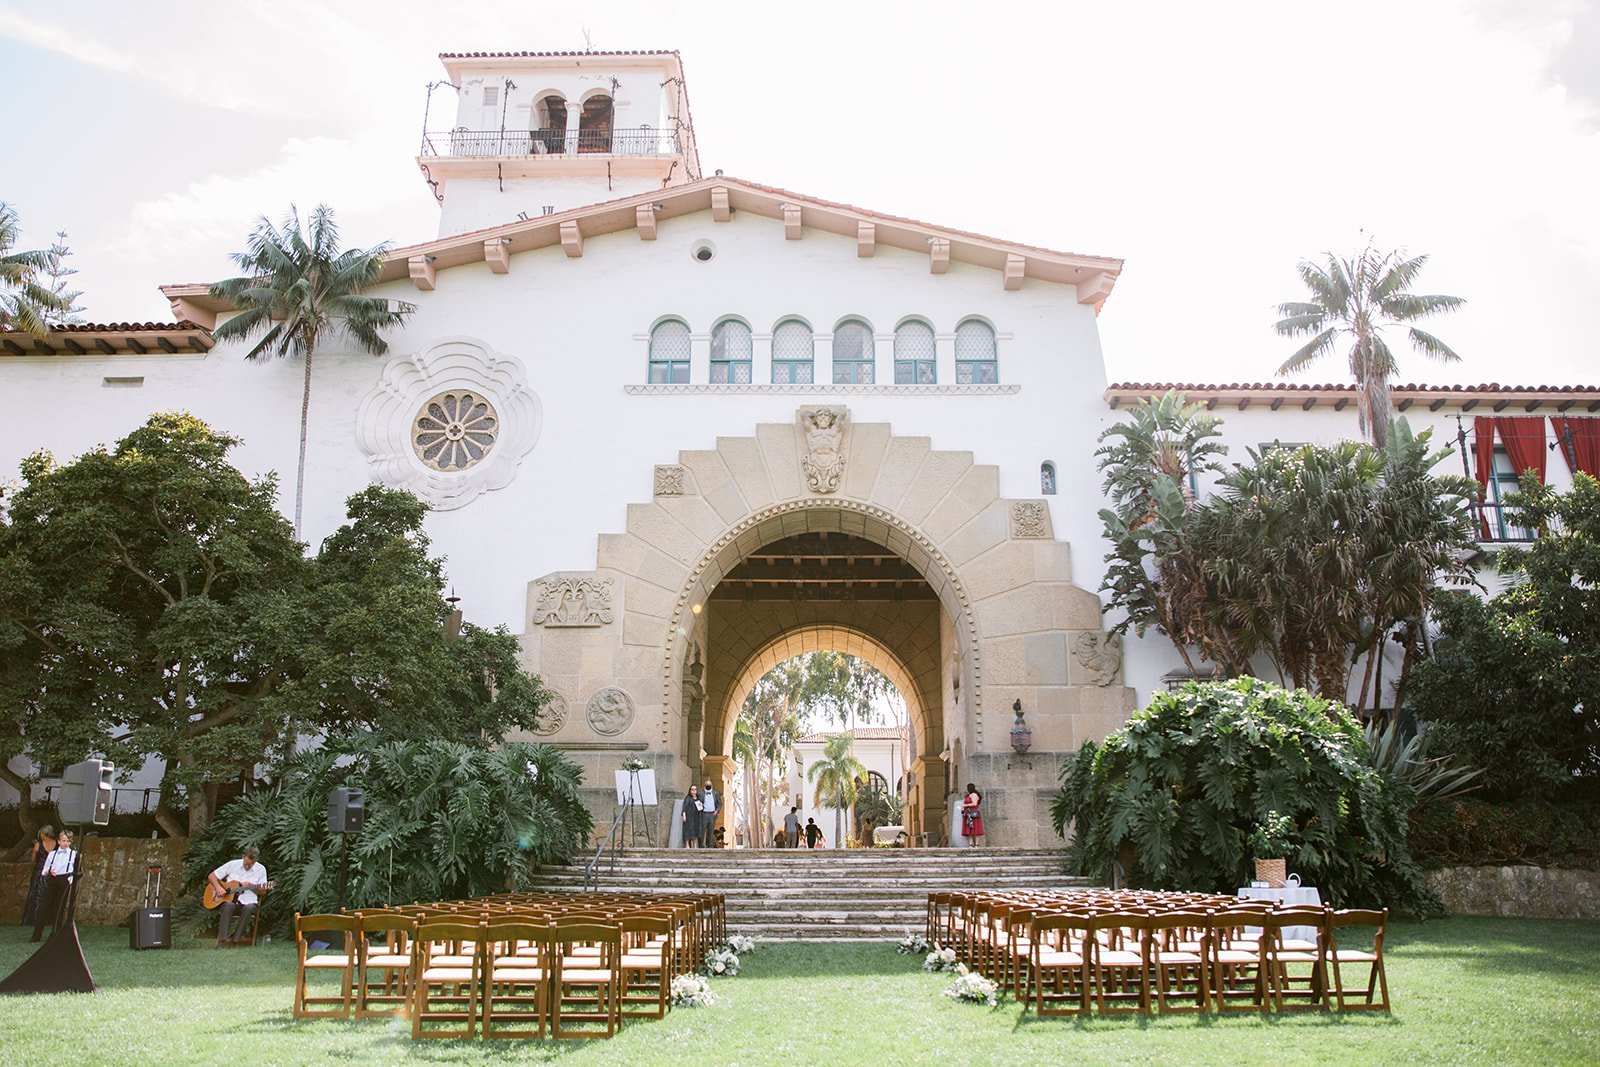 www.santabarbarawedding.com | Santa Barbara Courthouse | Amazing Days Events | Anna Delores Photography | Anna Le Pley Taylor | Ventura Rentals | The Ceremony Set Up at the Courthouse